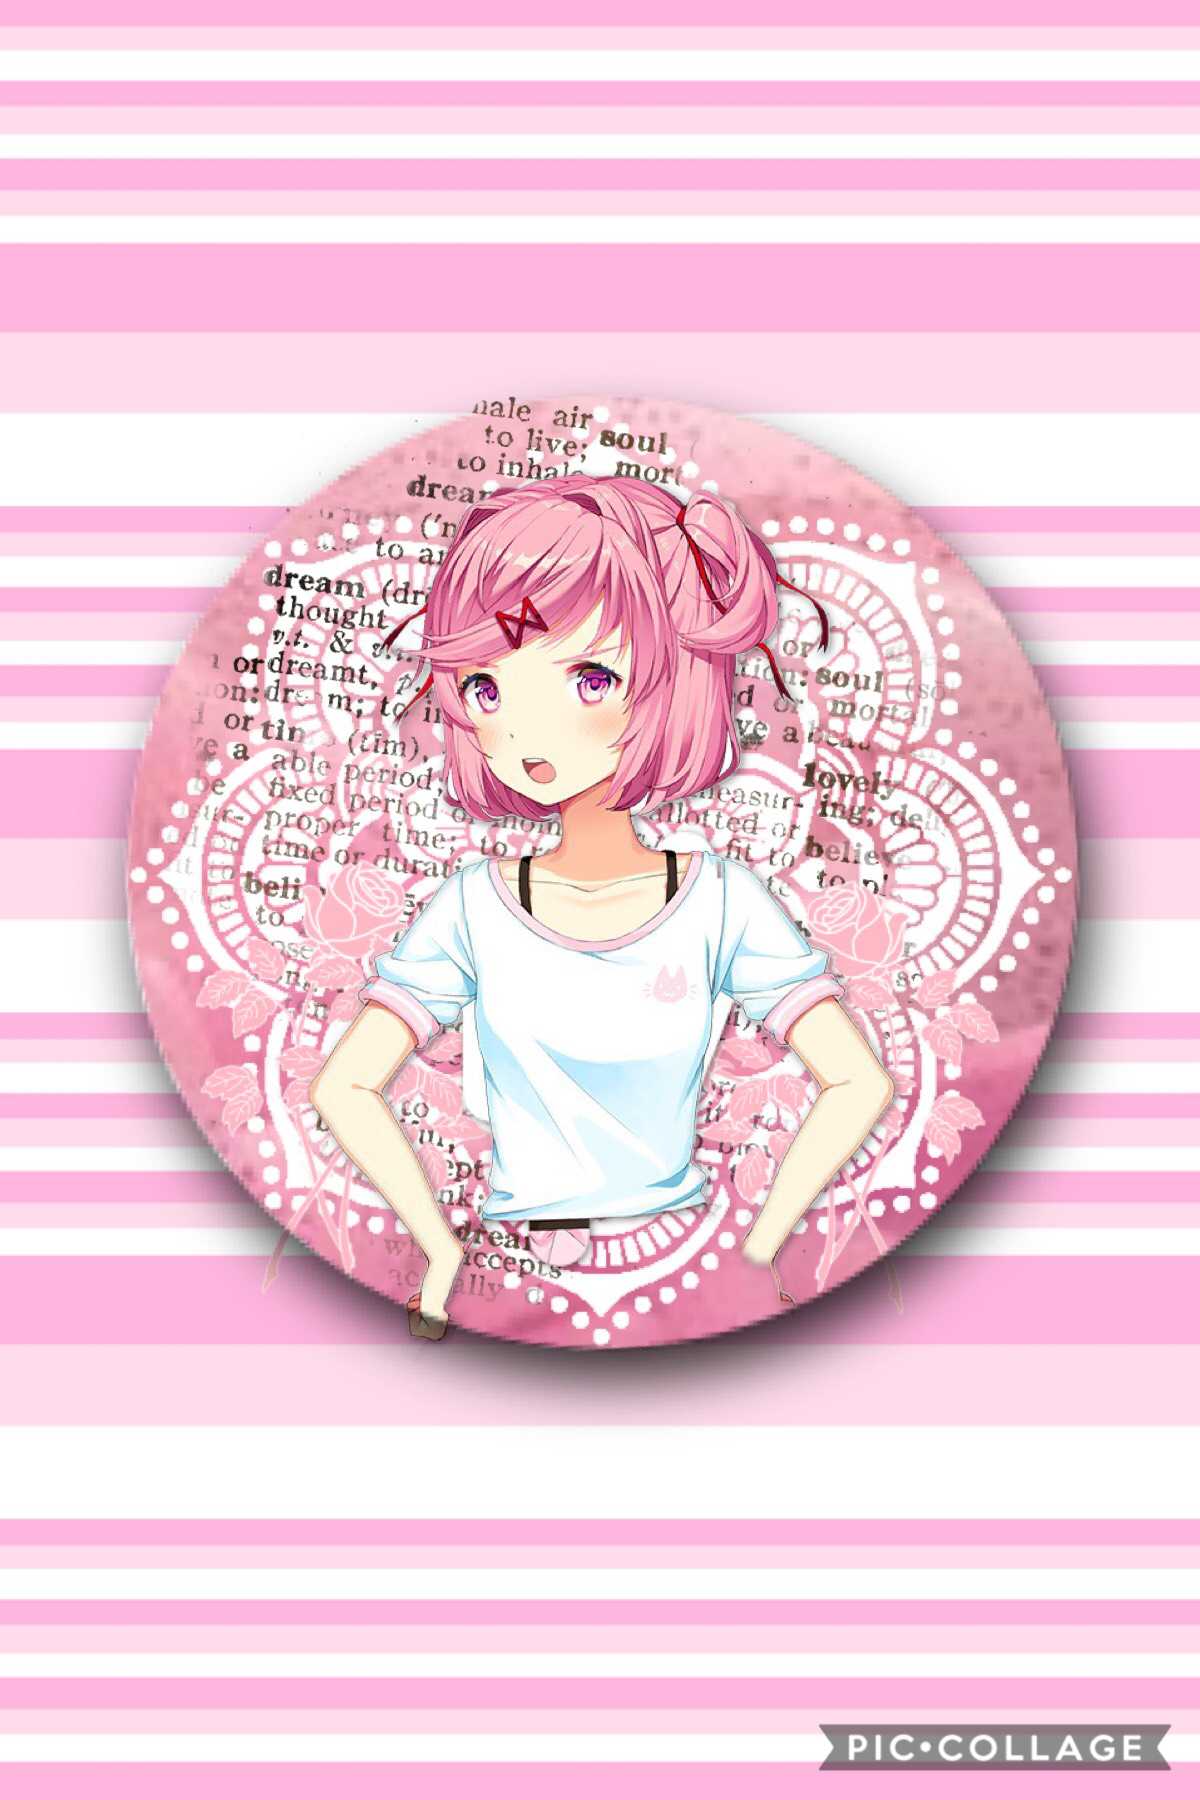 Eat the cake!(tap)🎂
Free Natsuki icon for anyone that wants it! If you use it, no need to give me credit, just comment that you are so I know! 